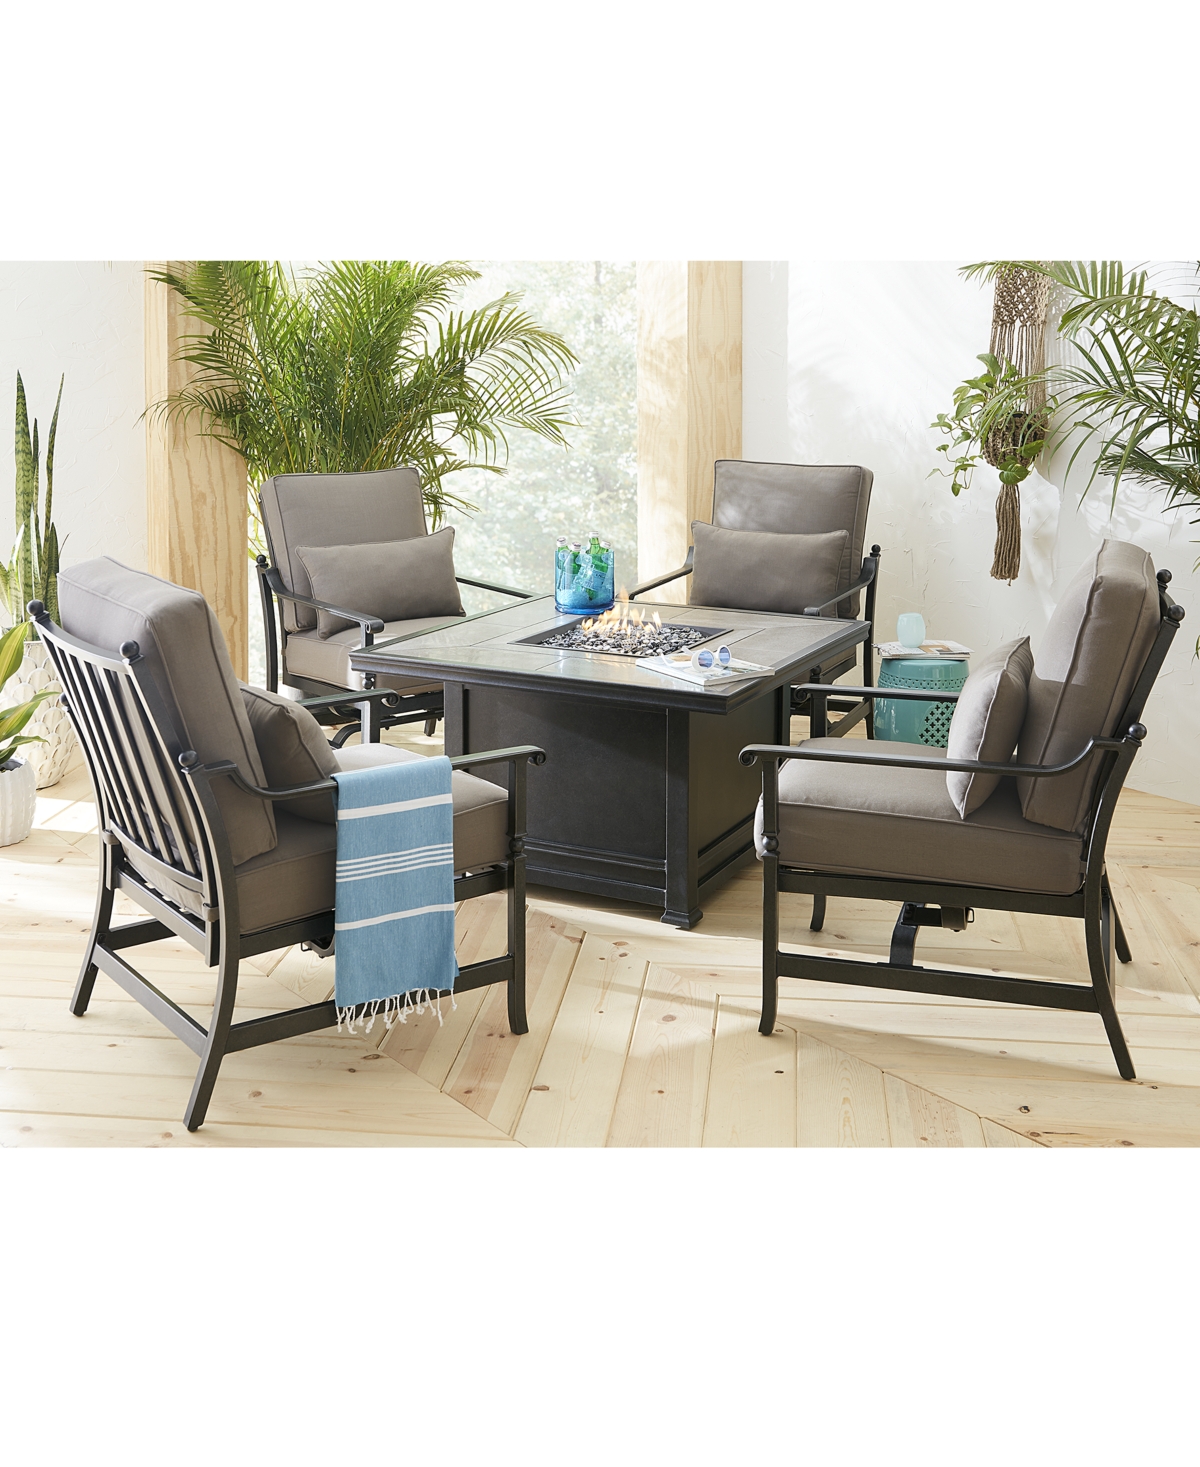 Amsterdam Outdoor 5-Pc. Chat Set (1 Fire Pit & 4 Rocker Club Chairs), Created for Macys